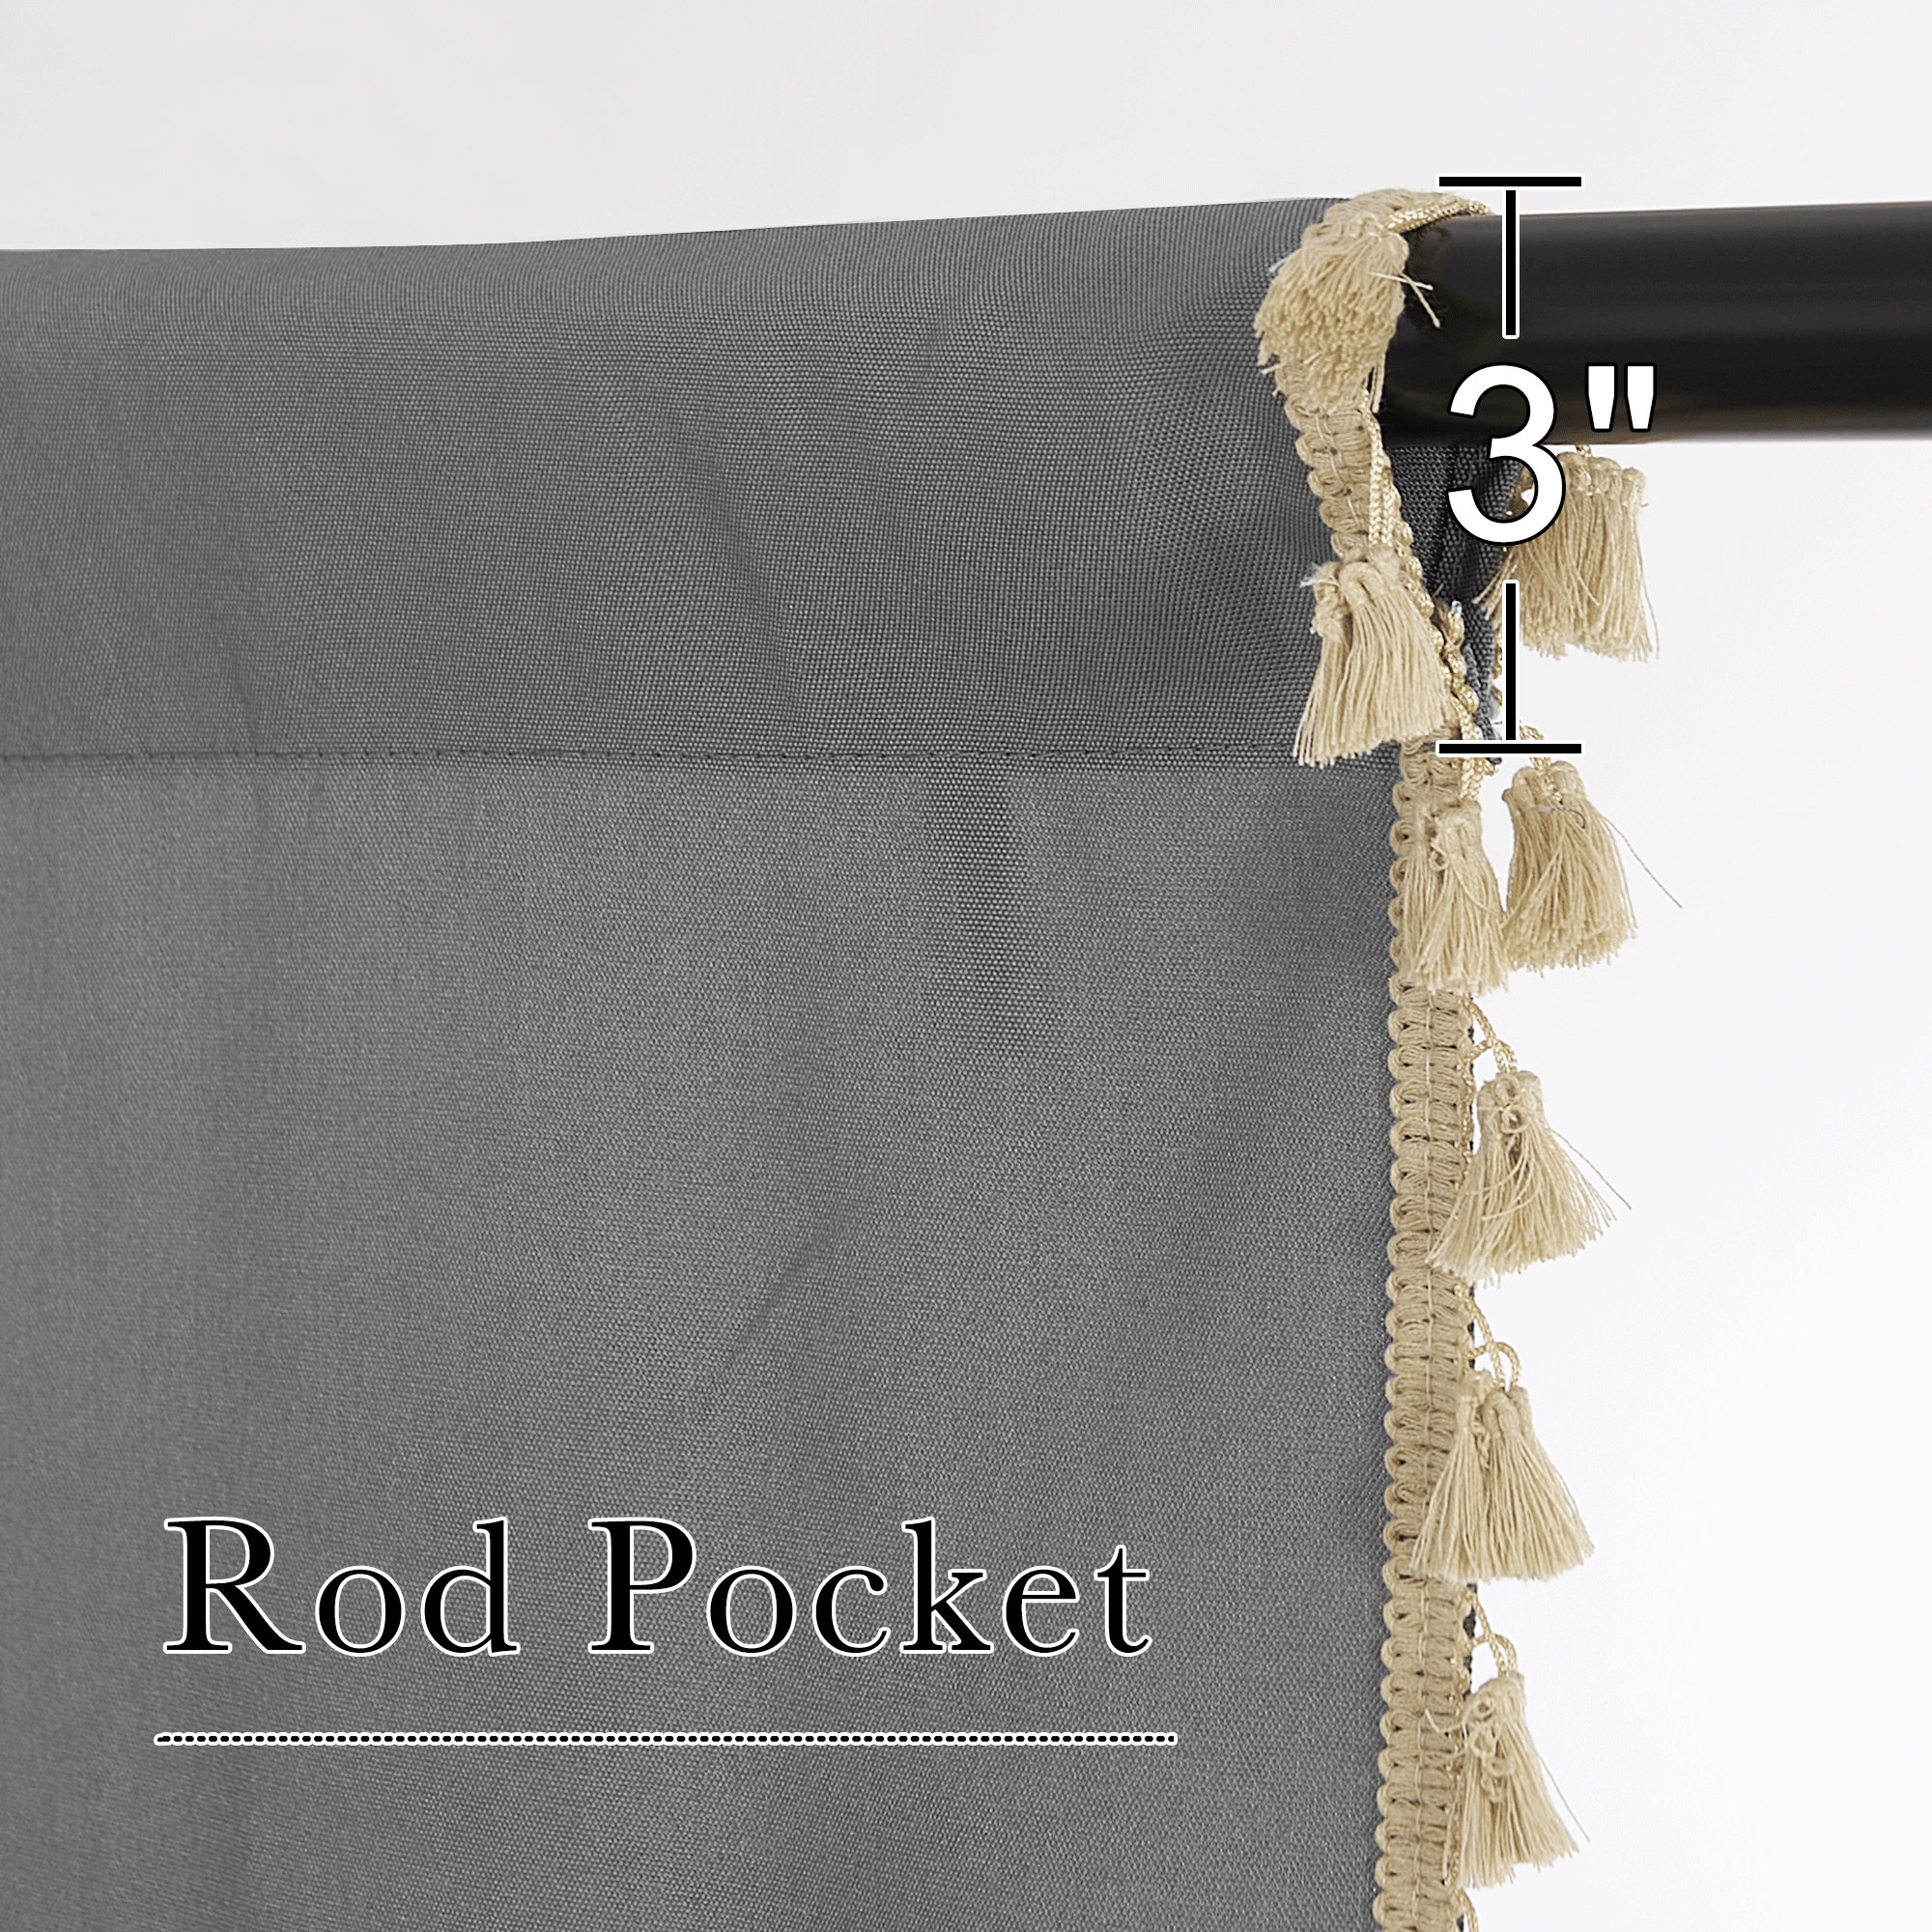 2 Panels Modern Rod Pocket Polyester Cafe Curtains with Tassels 2 Panels KGORGE Store